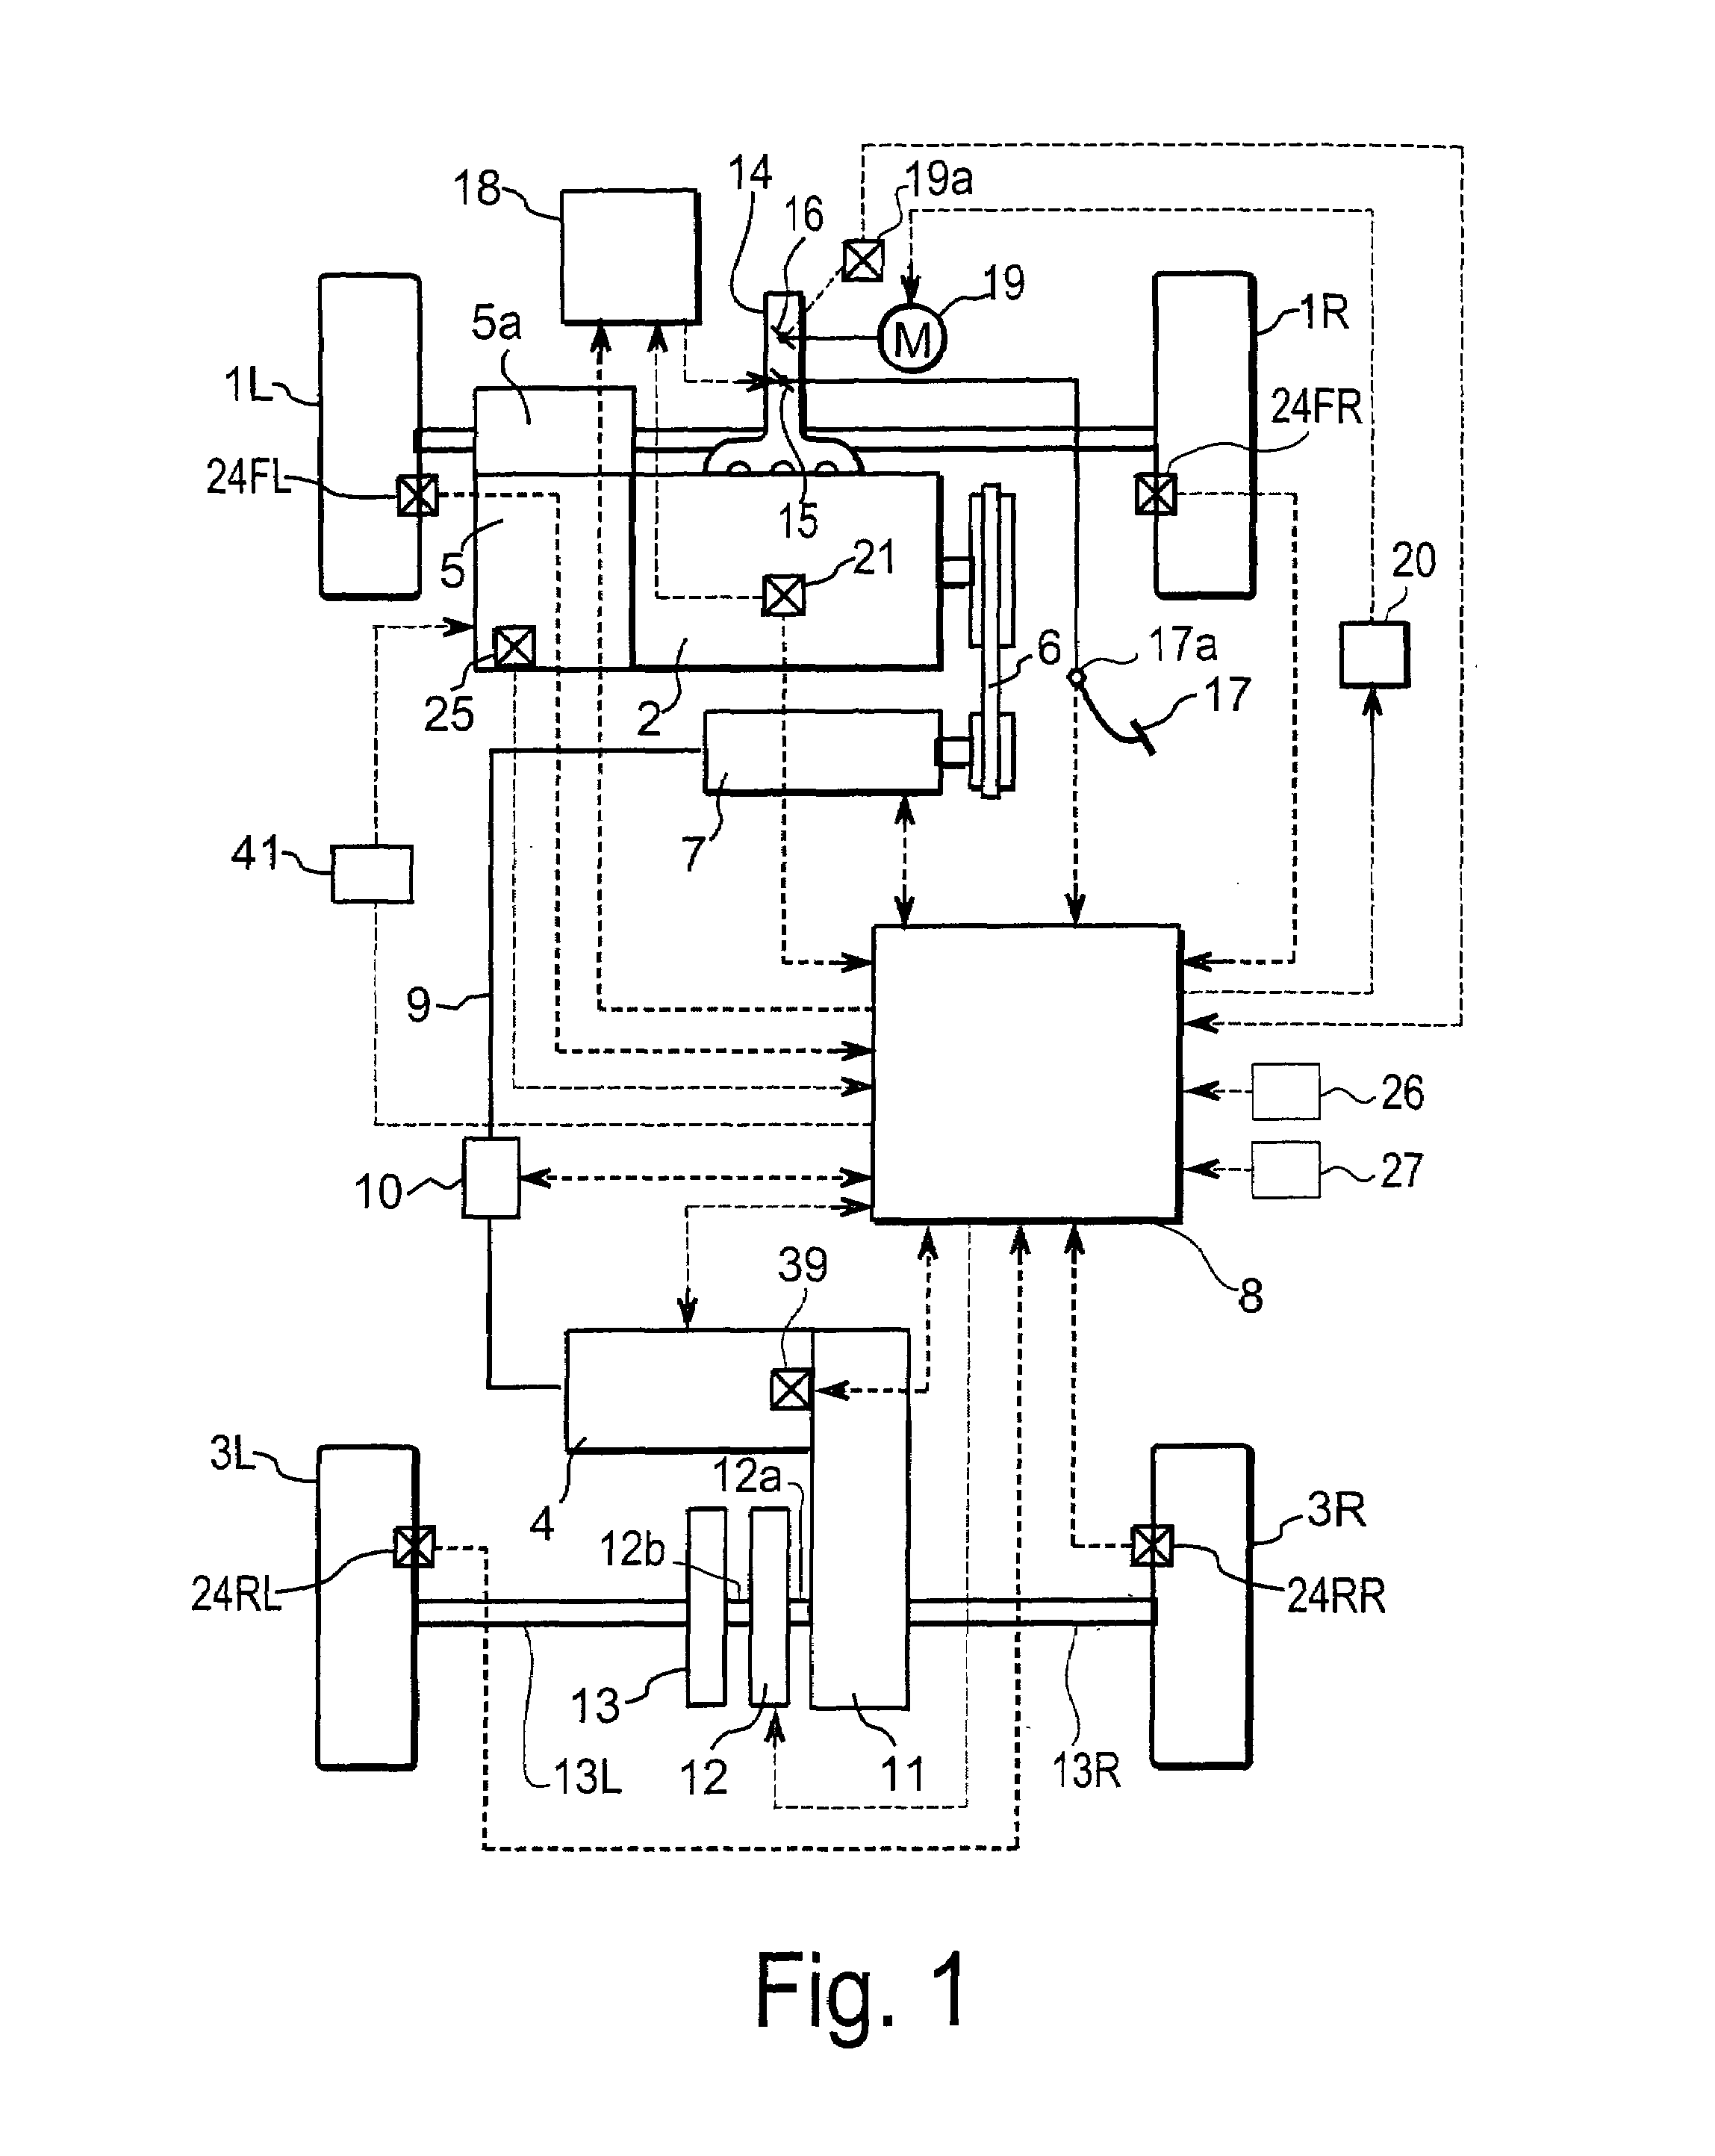 Vehicle driving force control apparatus